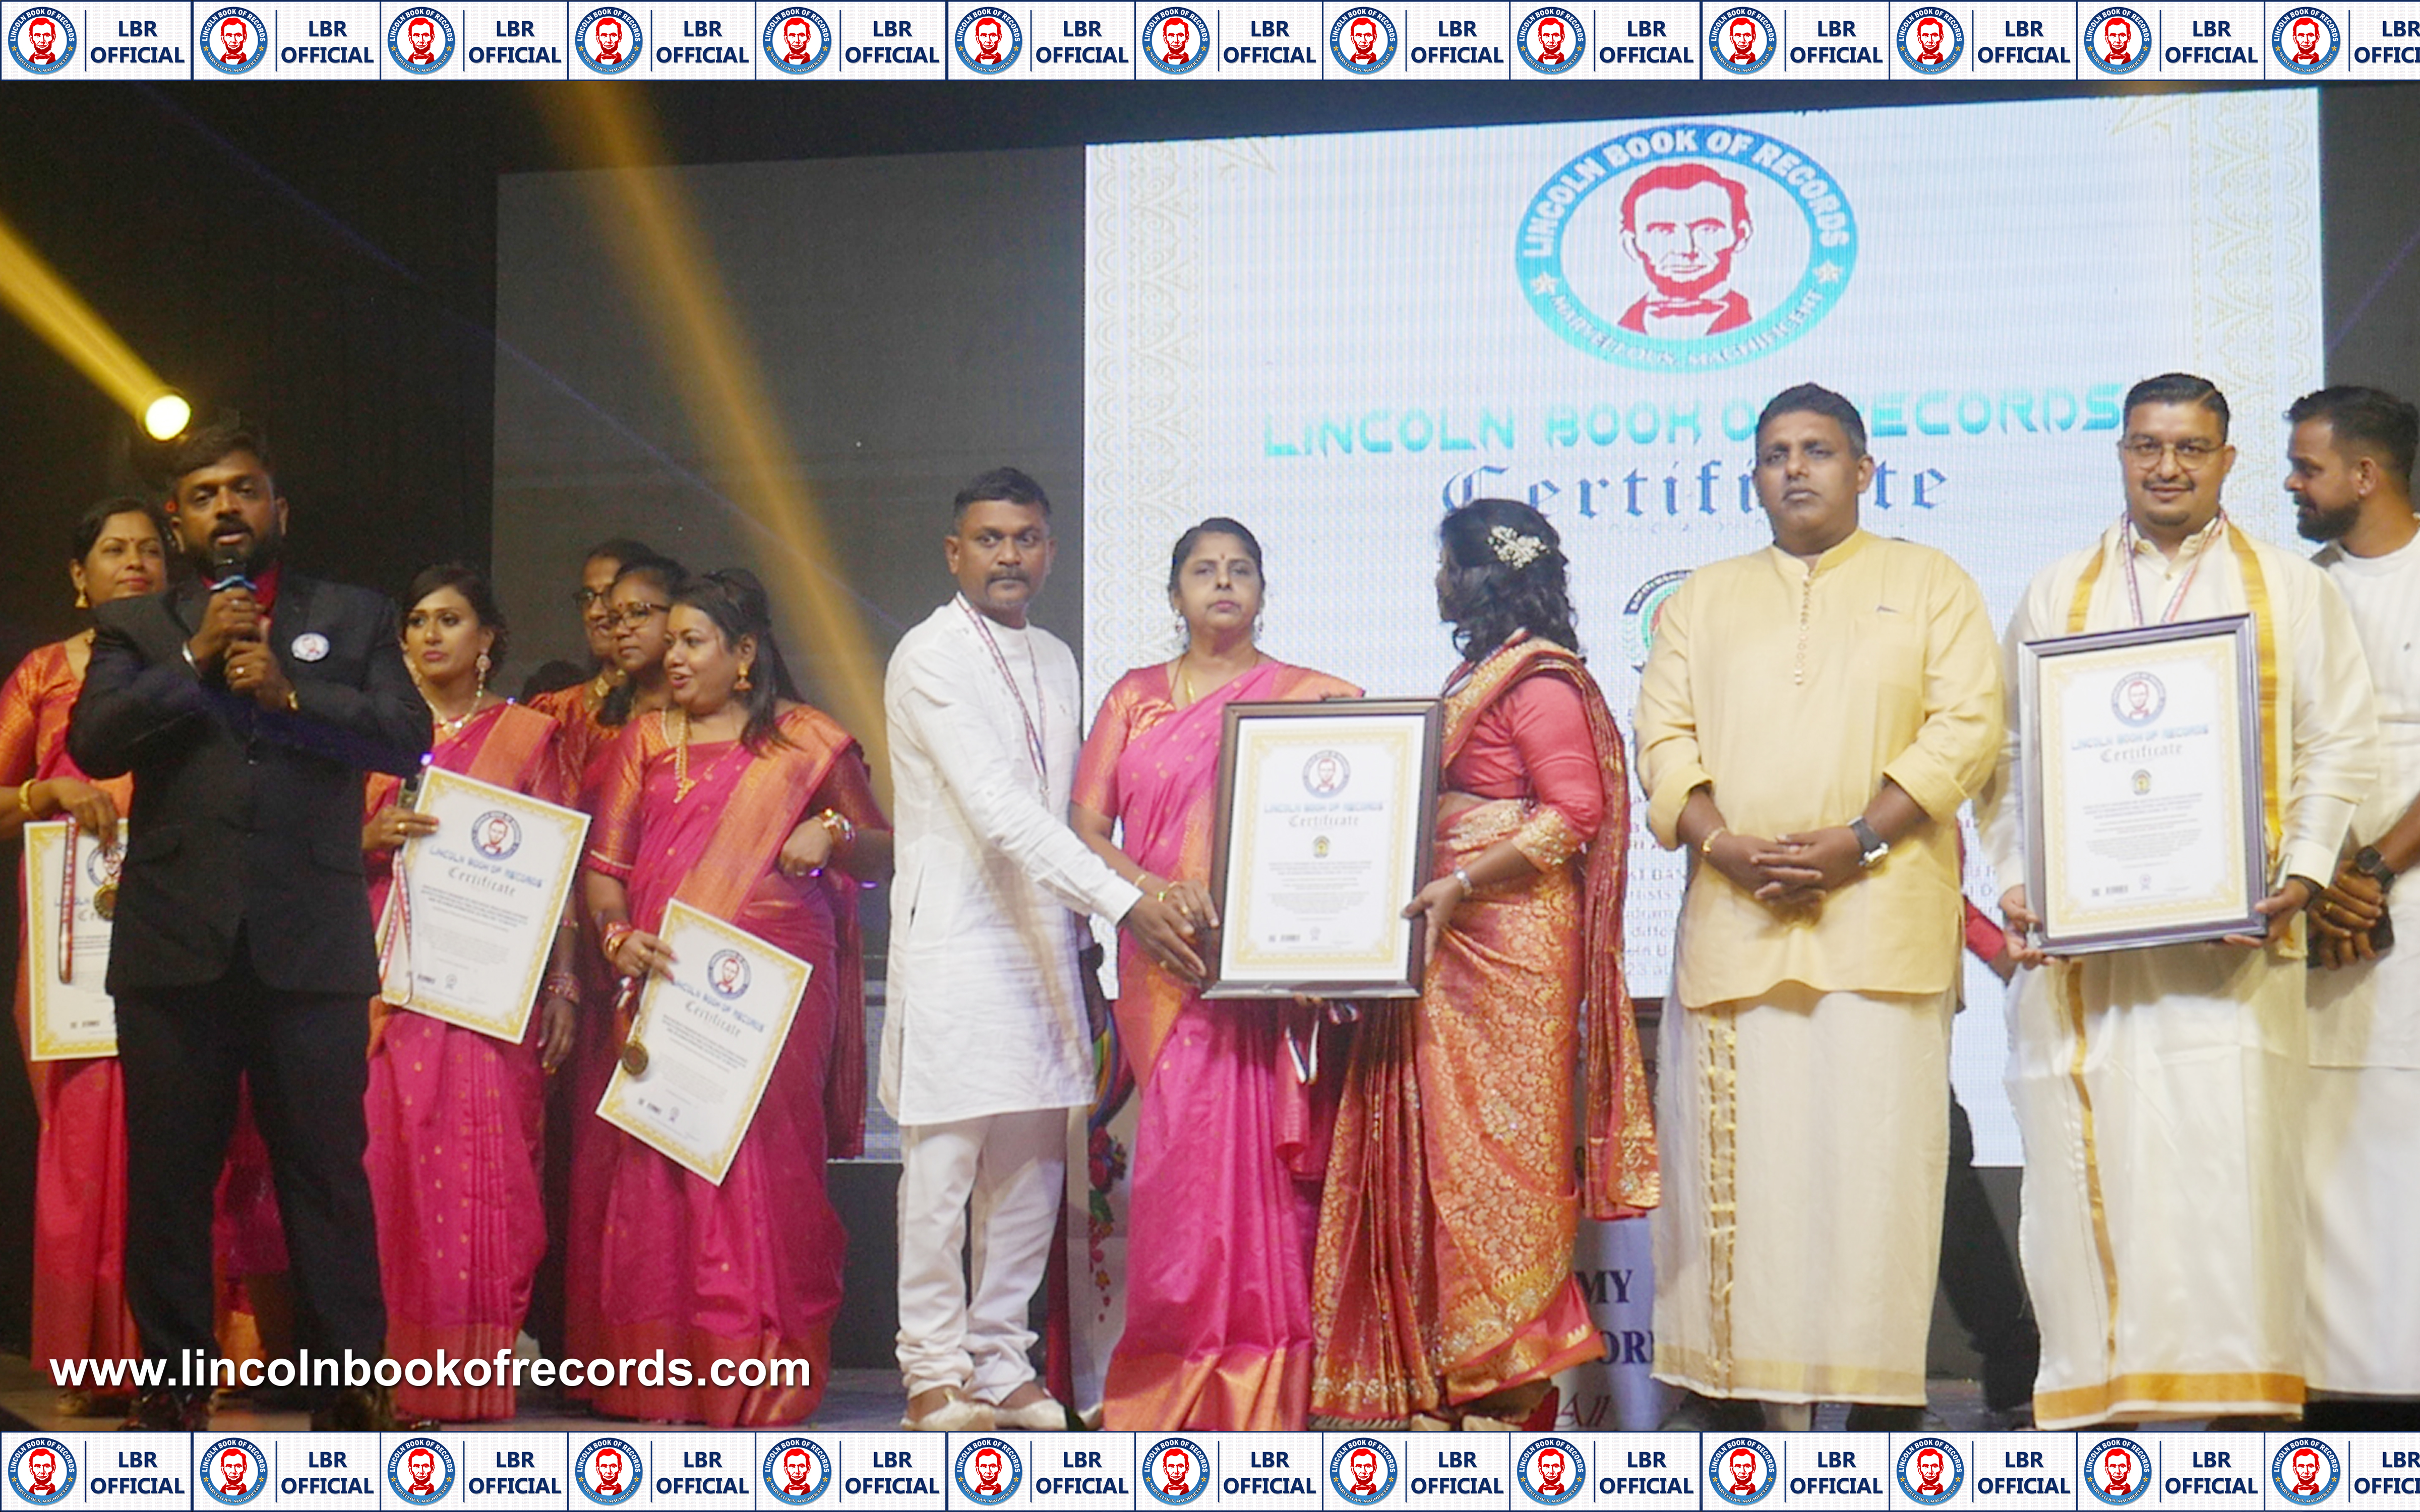 World Record by organising 500+ multi-racial people across 5 different  nations to perform multiple Tamil cultural Dance performances in the  name,"Sri Rudram International Cultural fest " at one place